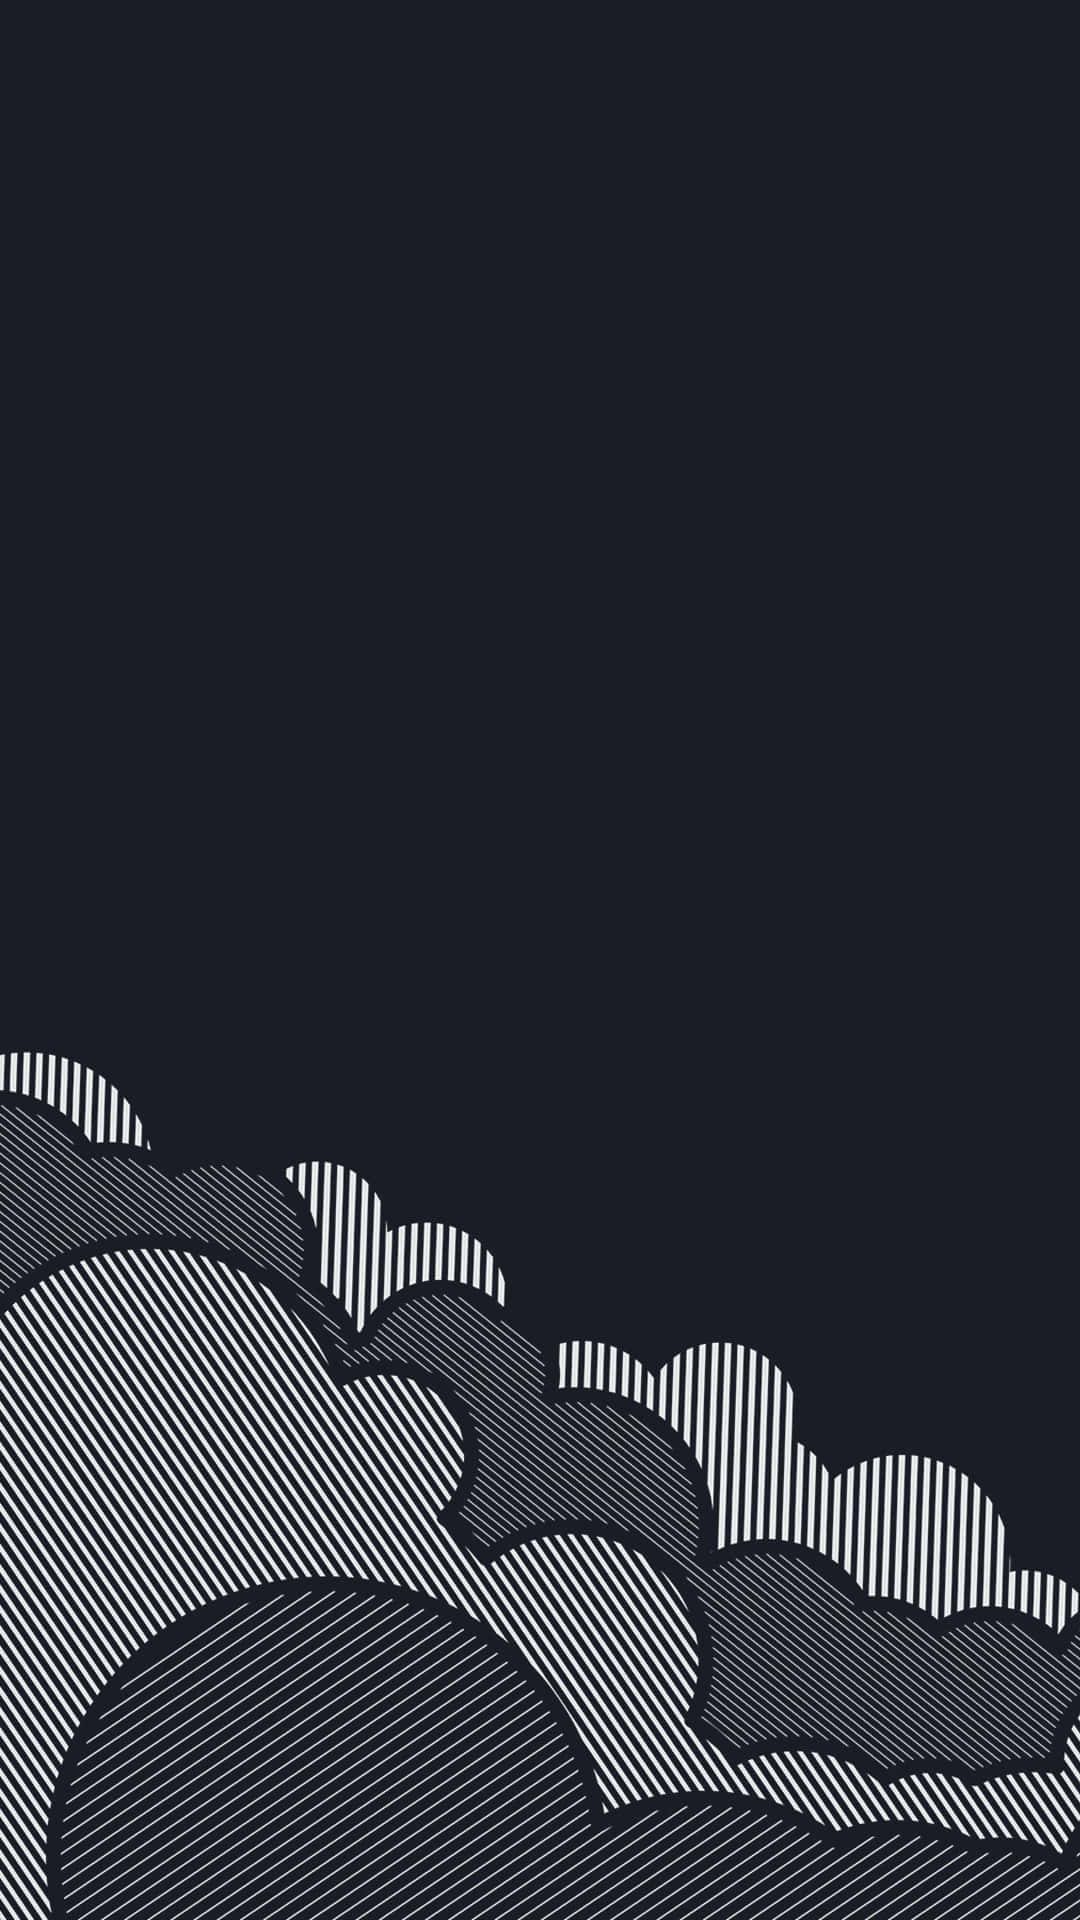 Clouds And Rain Vector | Price 1 Credit Usd $1 Wallpaper